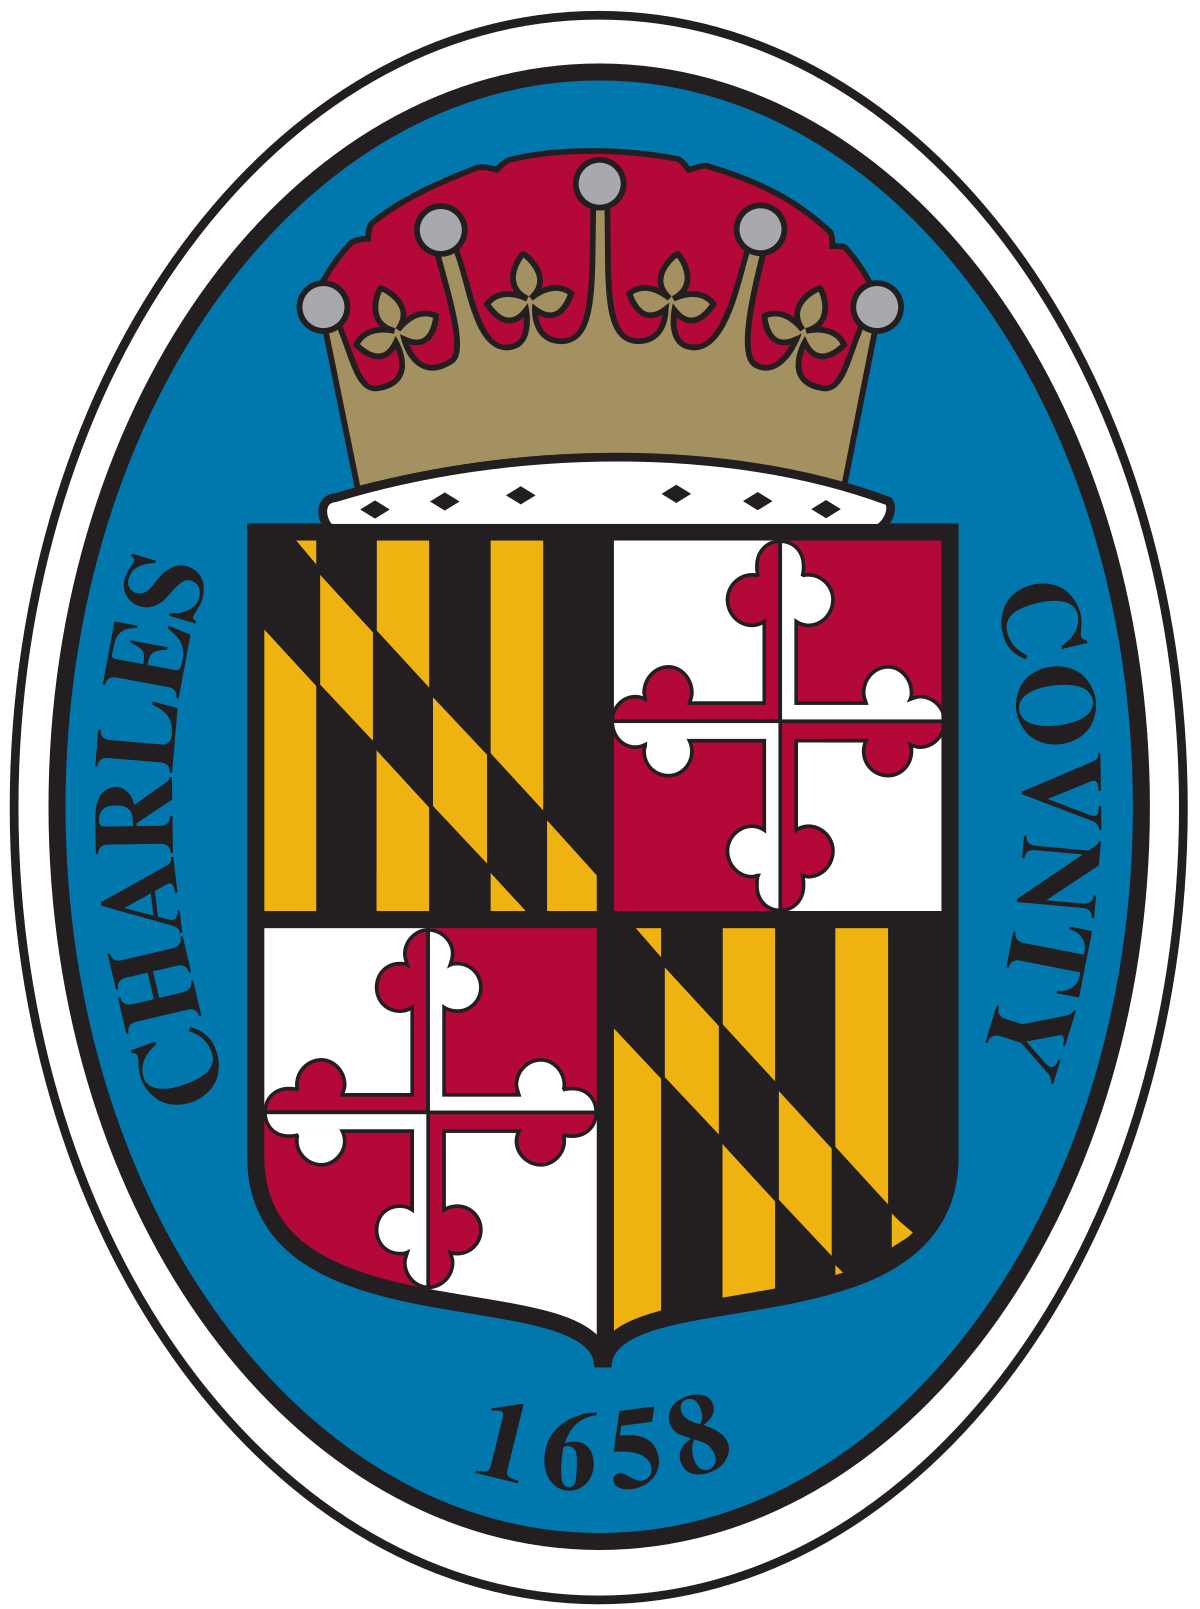 Charles County, MD seal